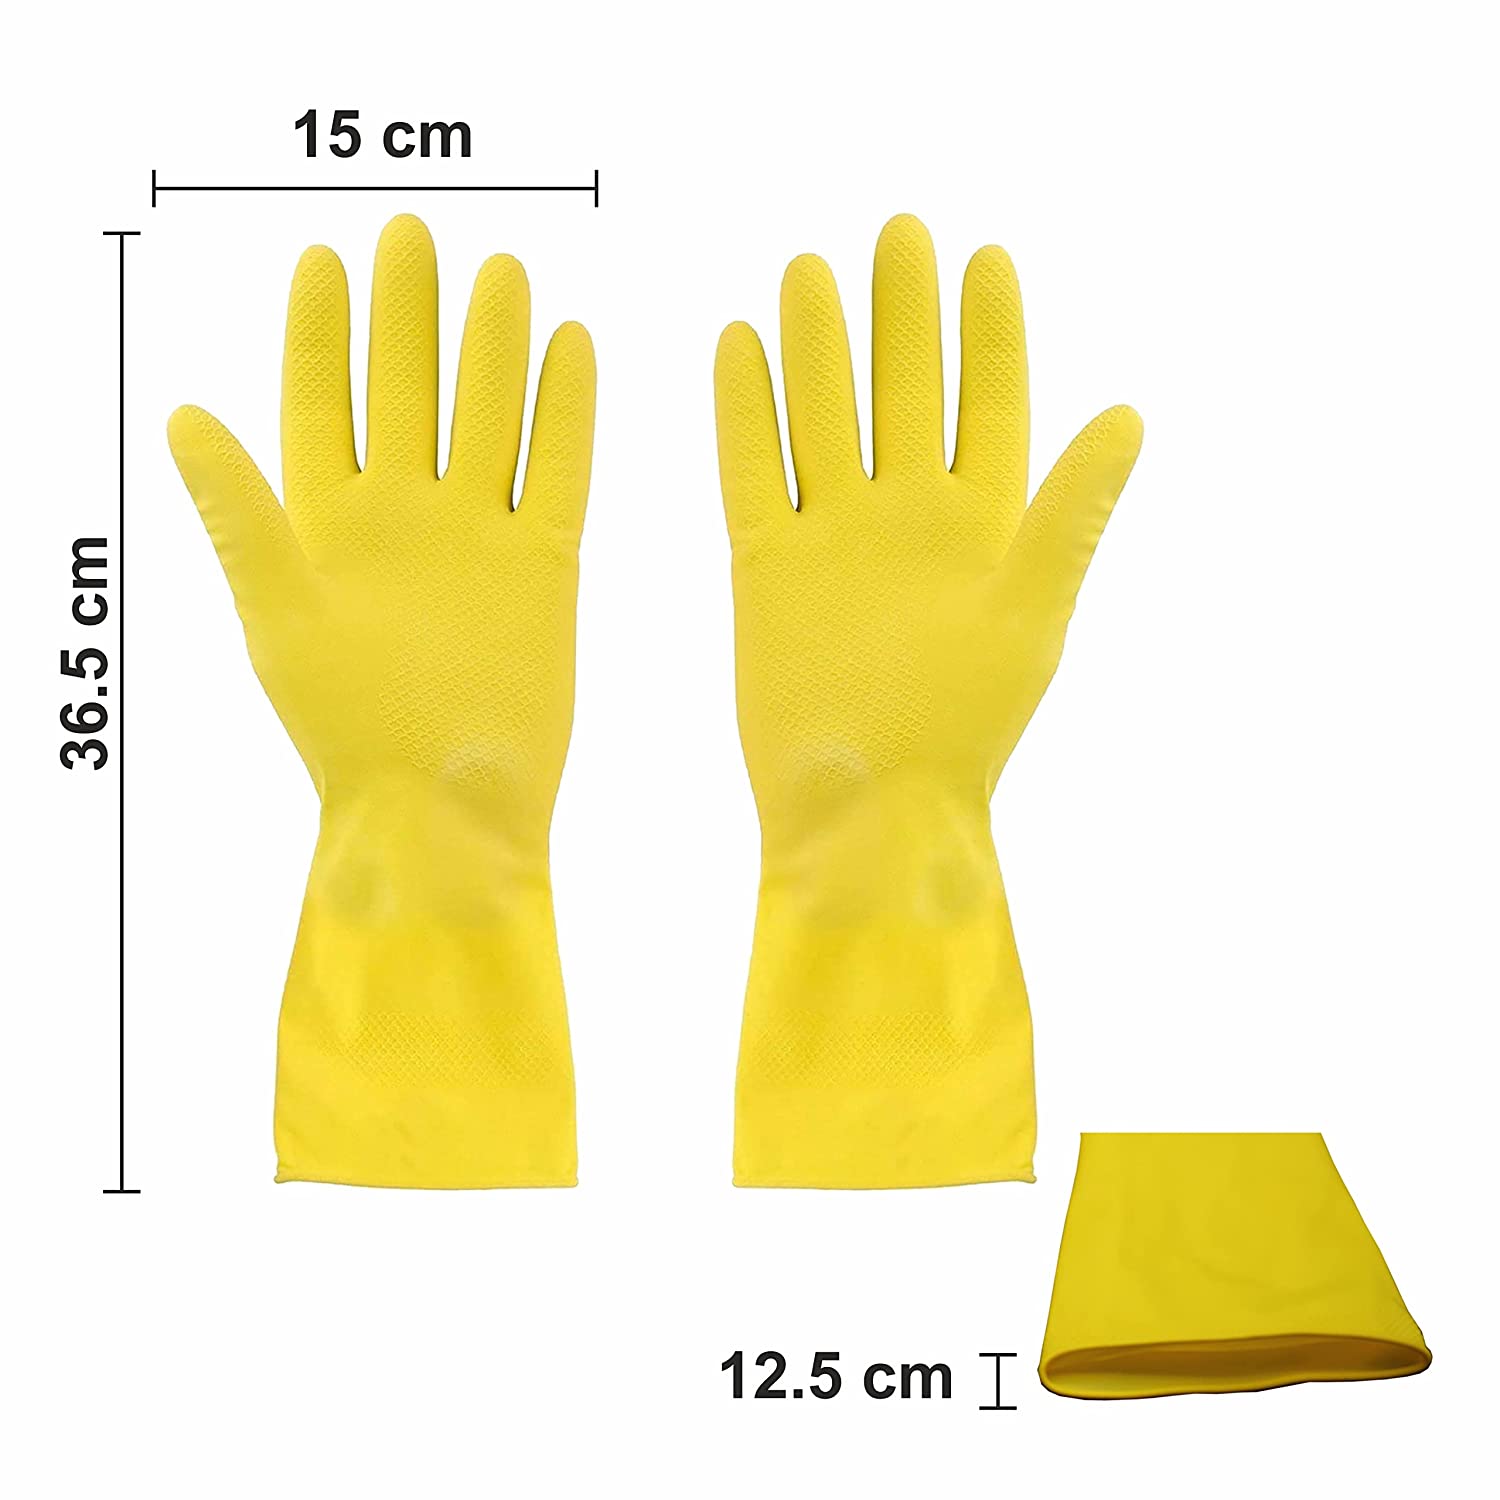 latex gloves; chemical resistance glove; heavy duty gloves; industrial gloves